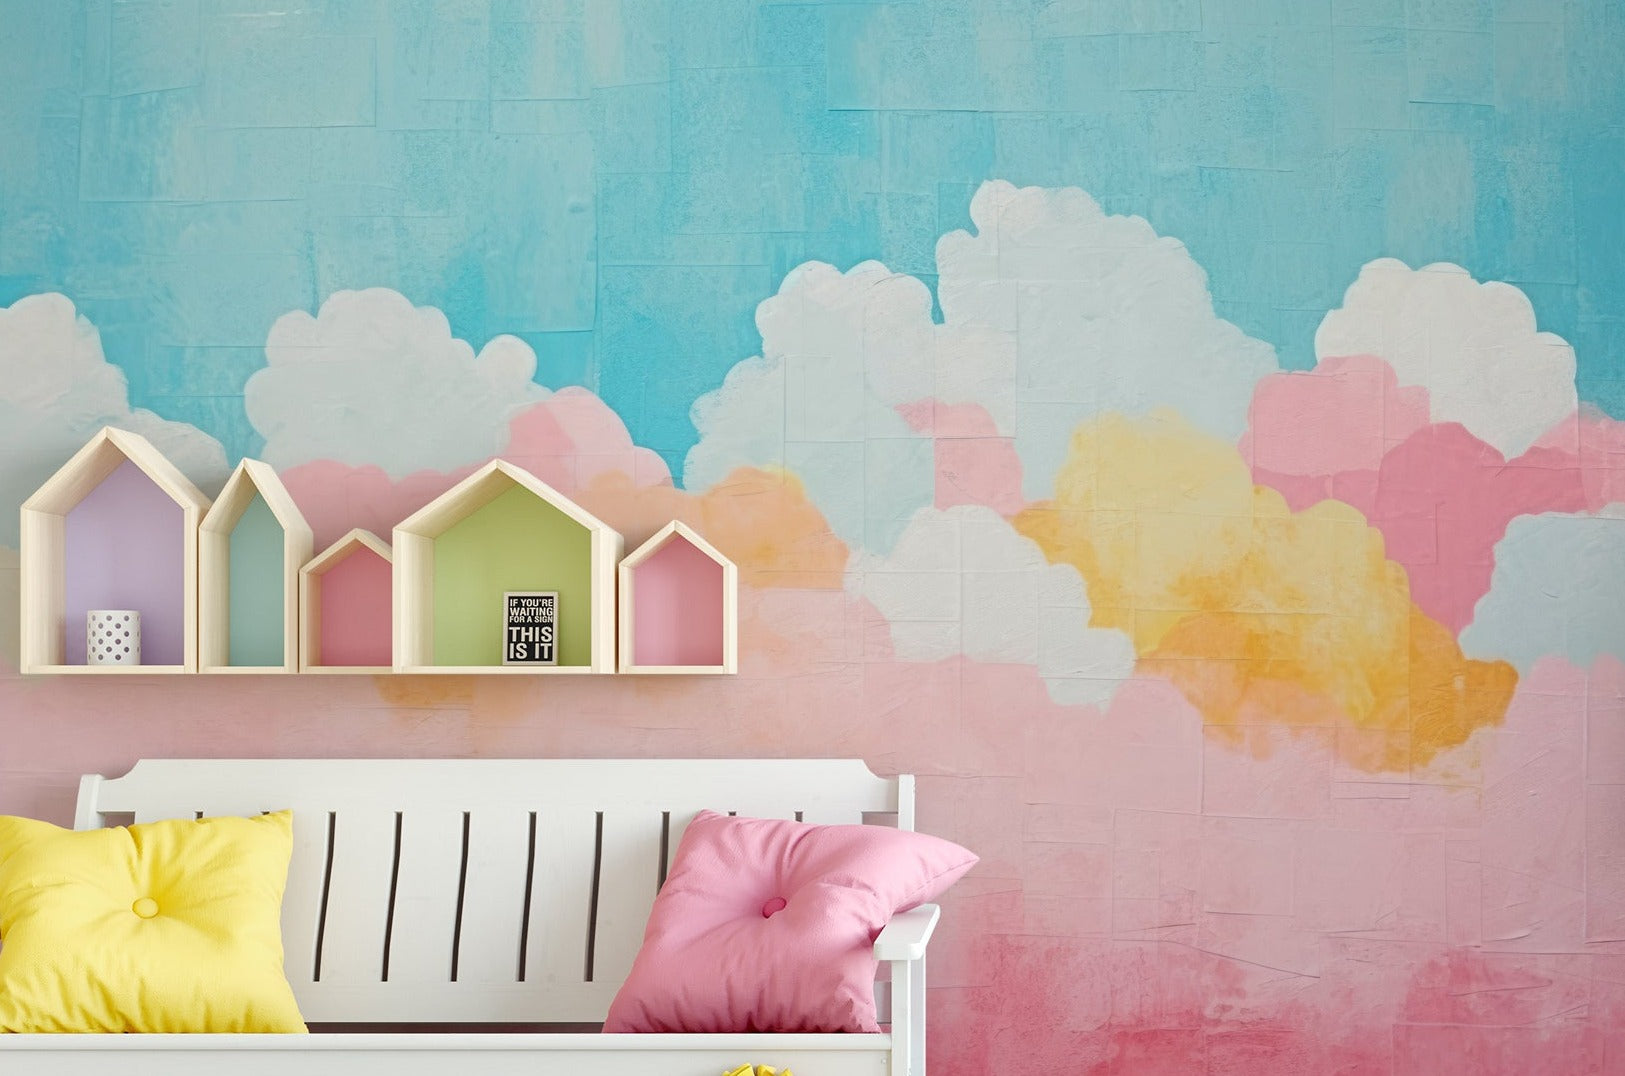 "Vibrant 'Candy Clouds Mural' in a nursery, with pastel clouds painted on the wall, enhancing the cheerful and soothing environment."